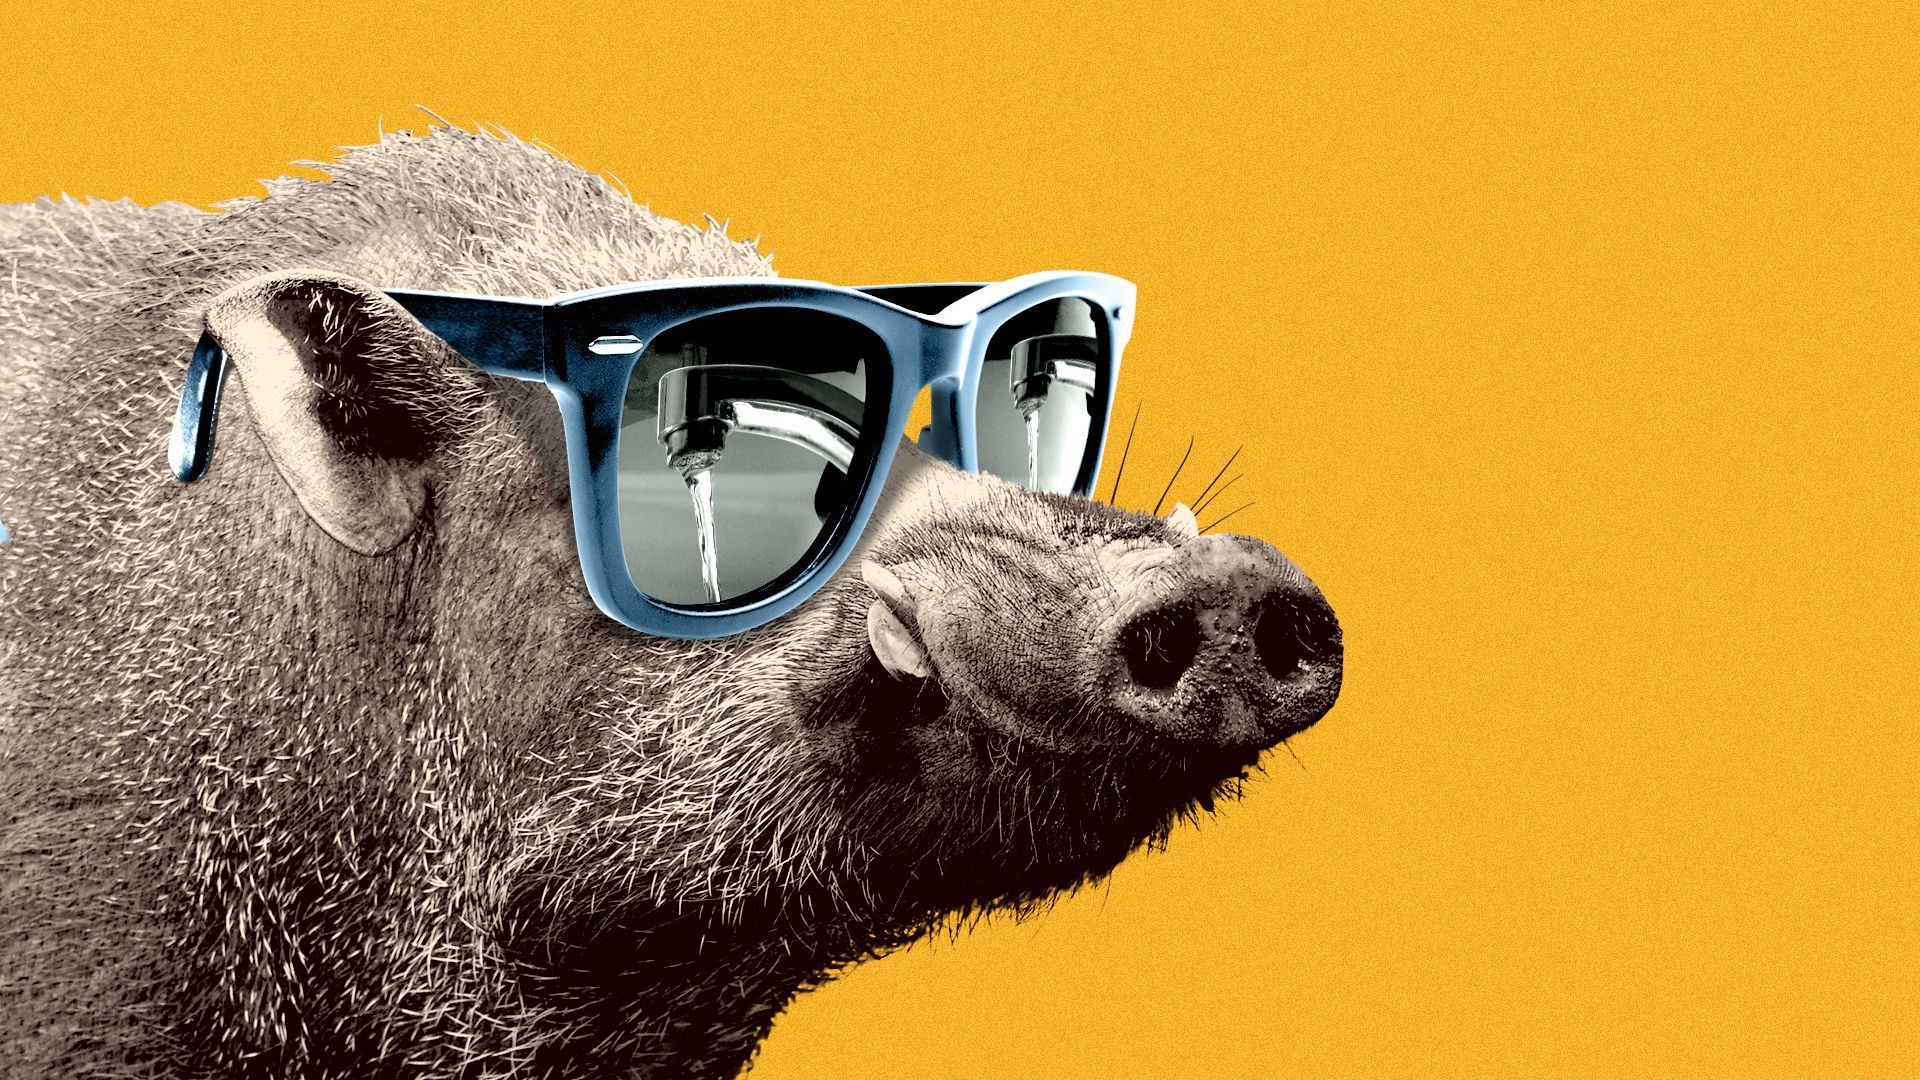 Illustration of a razorback wearing sunglasses with a faucet reflected in the lenses.